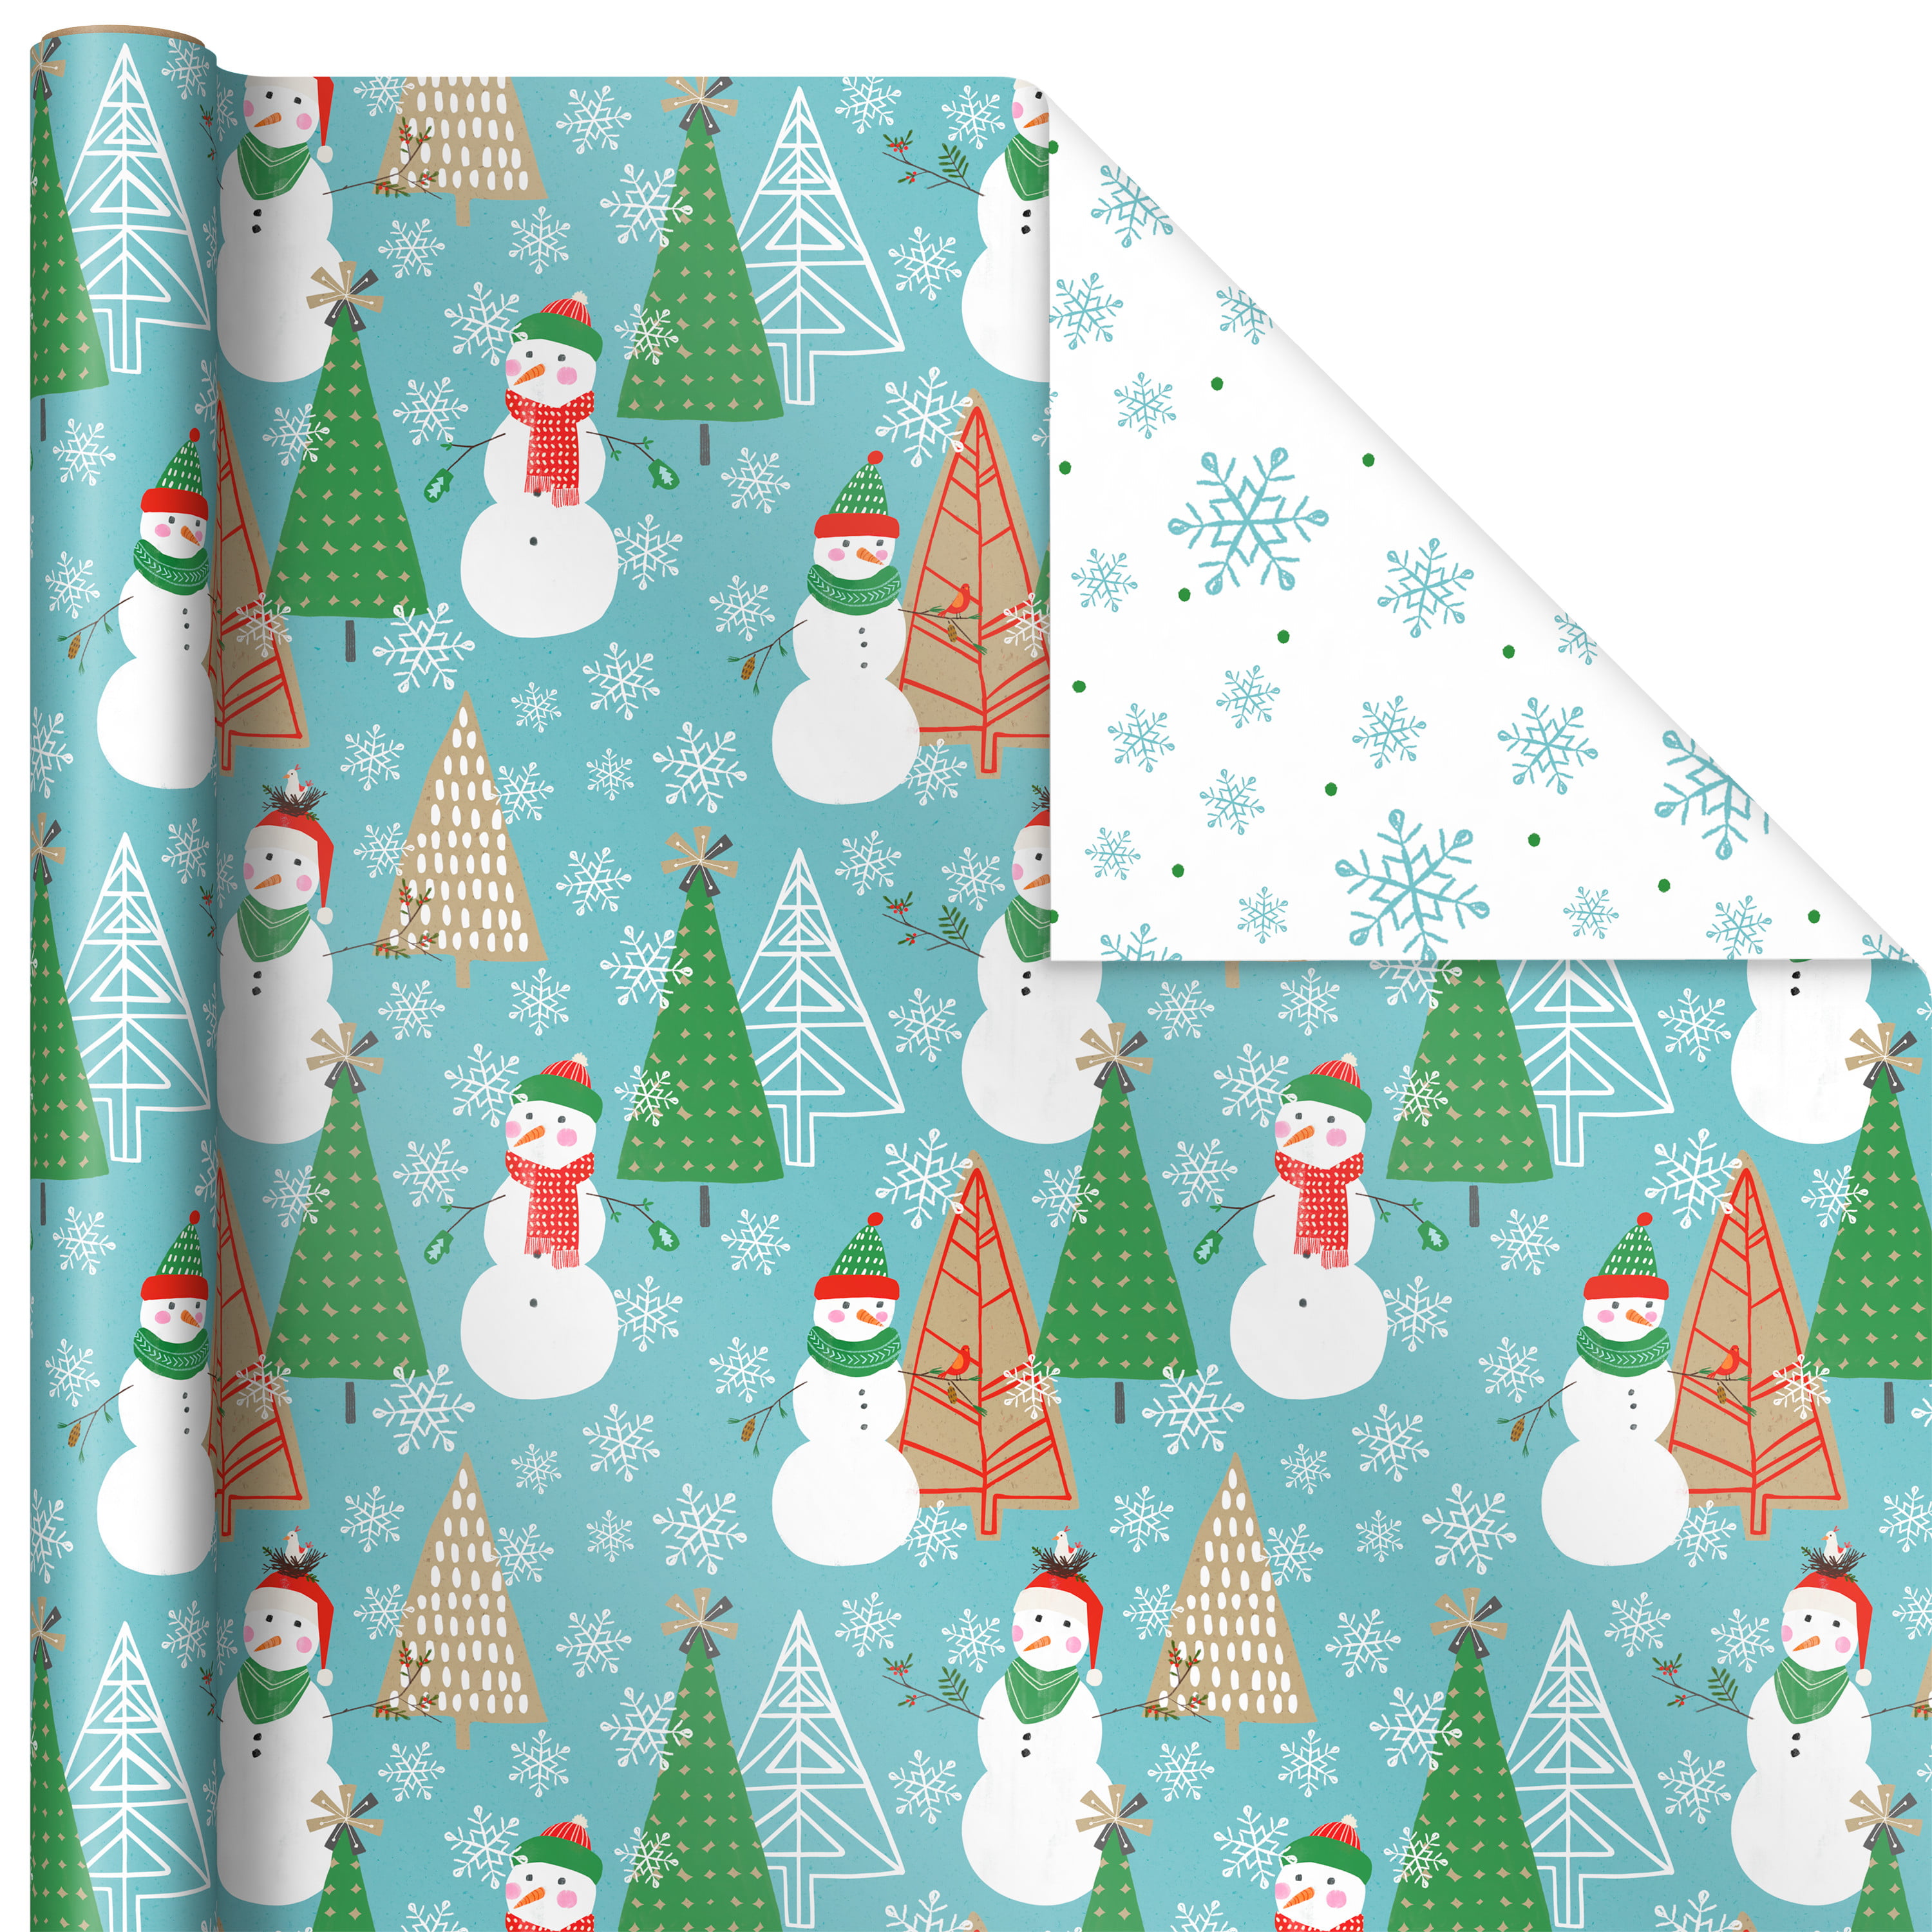 NiHome Christmas Holiday Wrapping Paper Pack of 8 Patterns, 28x20 inch Matte and Glossy Finish Kraft Paper Assortment Christmas Tree Stocking